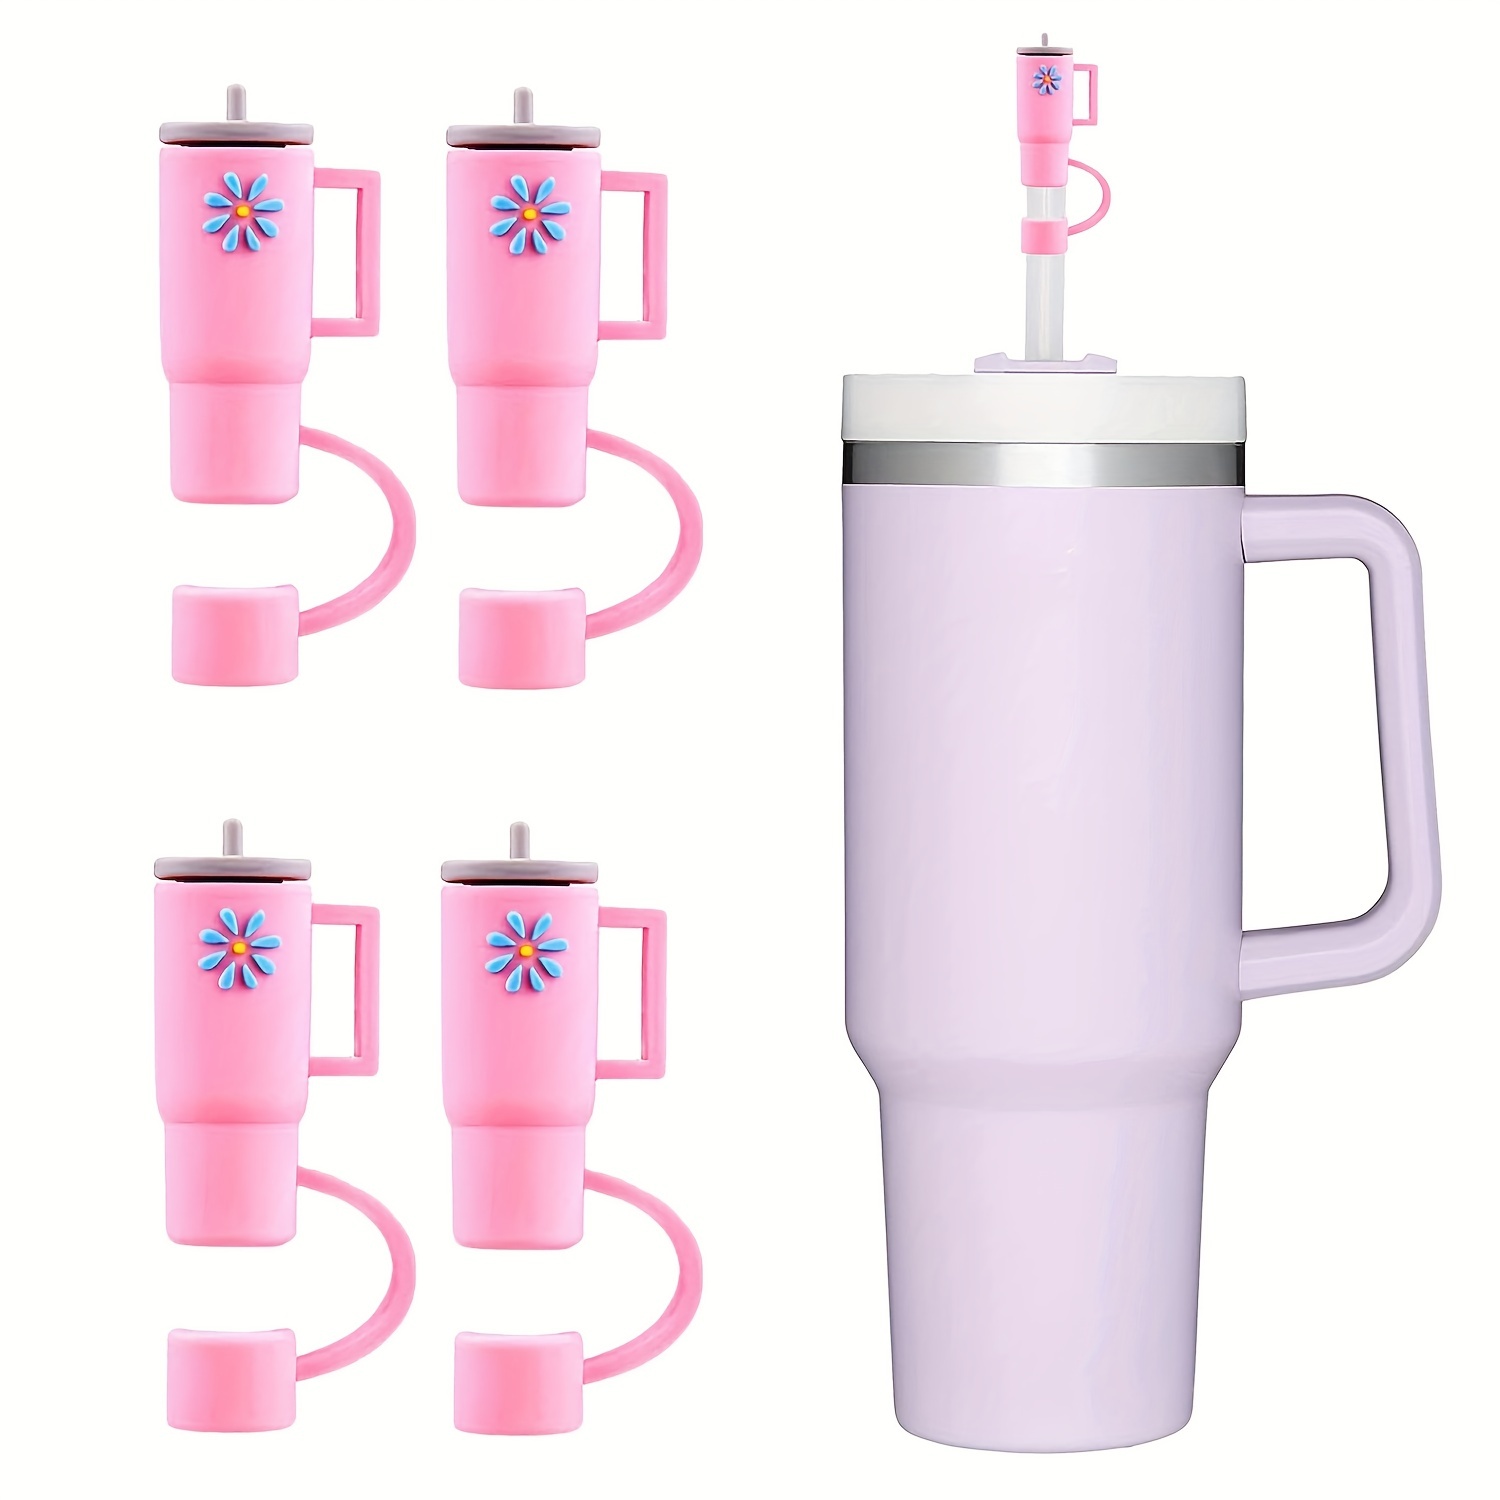 Cute Straw Toppers: Silicone Cover Protectors For Stanley Tumblers